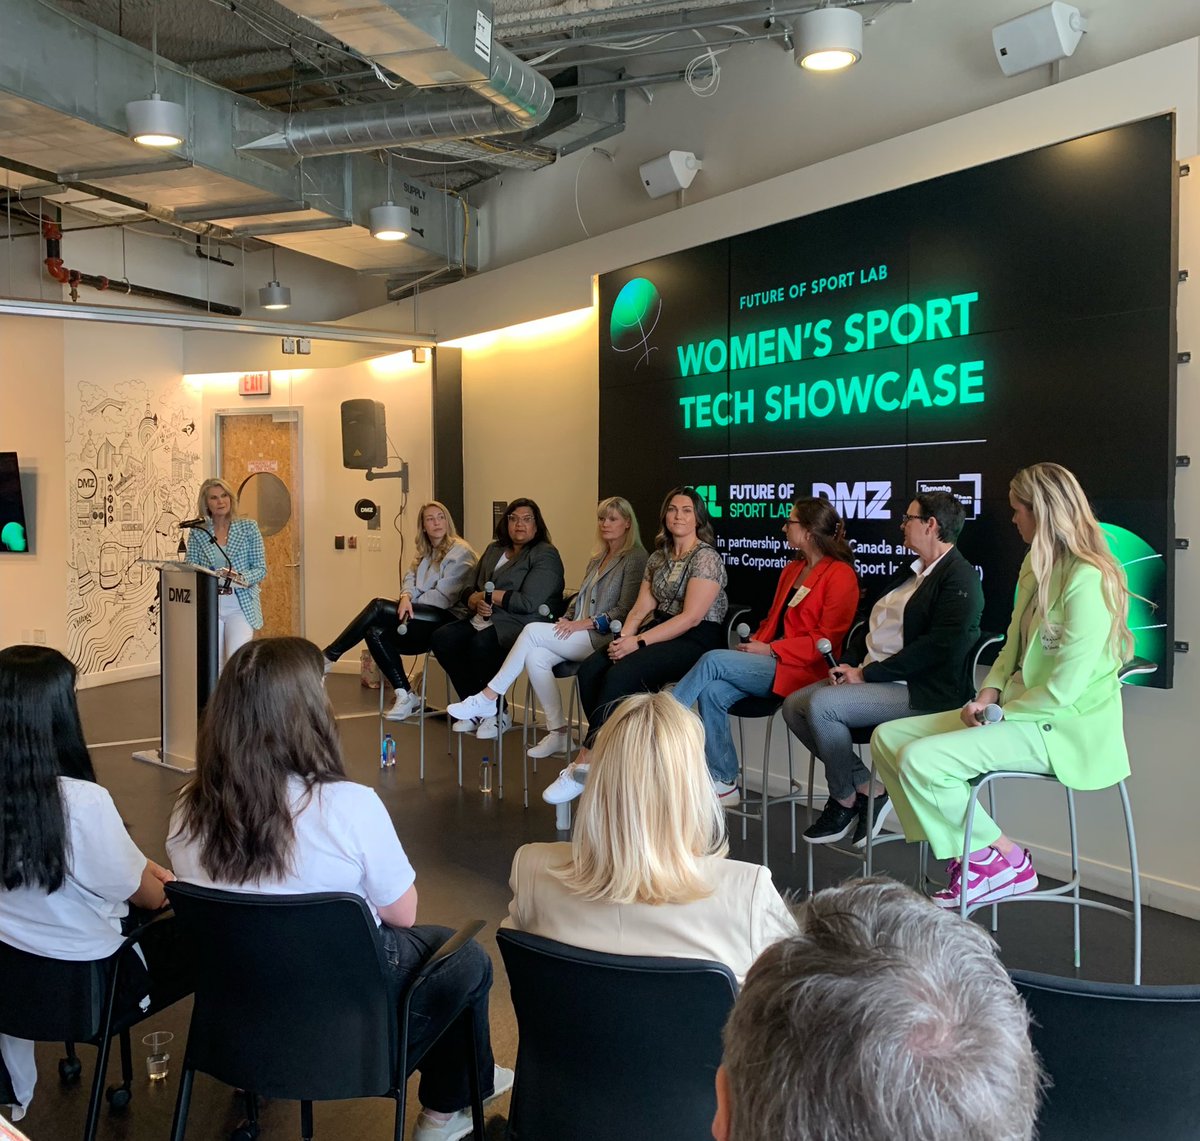 Insightful and meaningful conversations at the Future of Sport Lab (FSL) Women’s Sport Tech Showcase this morning! Moderated by @SNChrisSimpson, the event celebrated women in leadership and sport business within Canada and North America! #CIMORONI #WomeninSport #WomeninBusiness